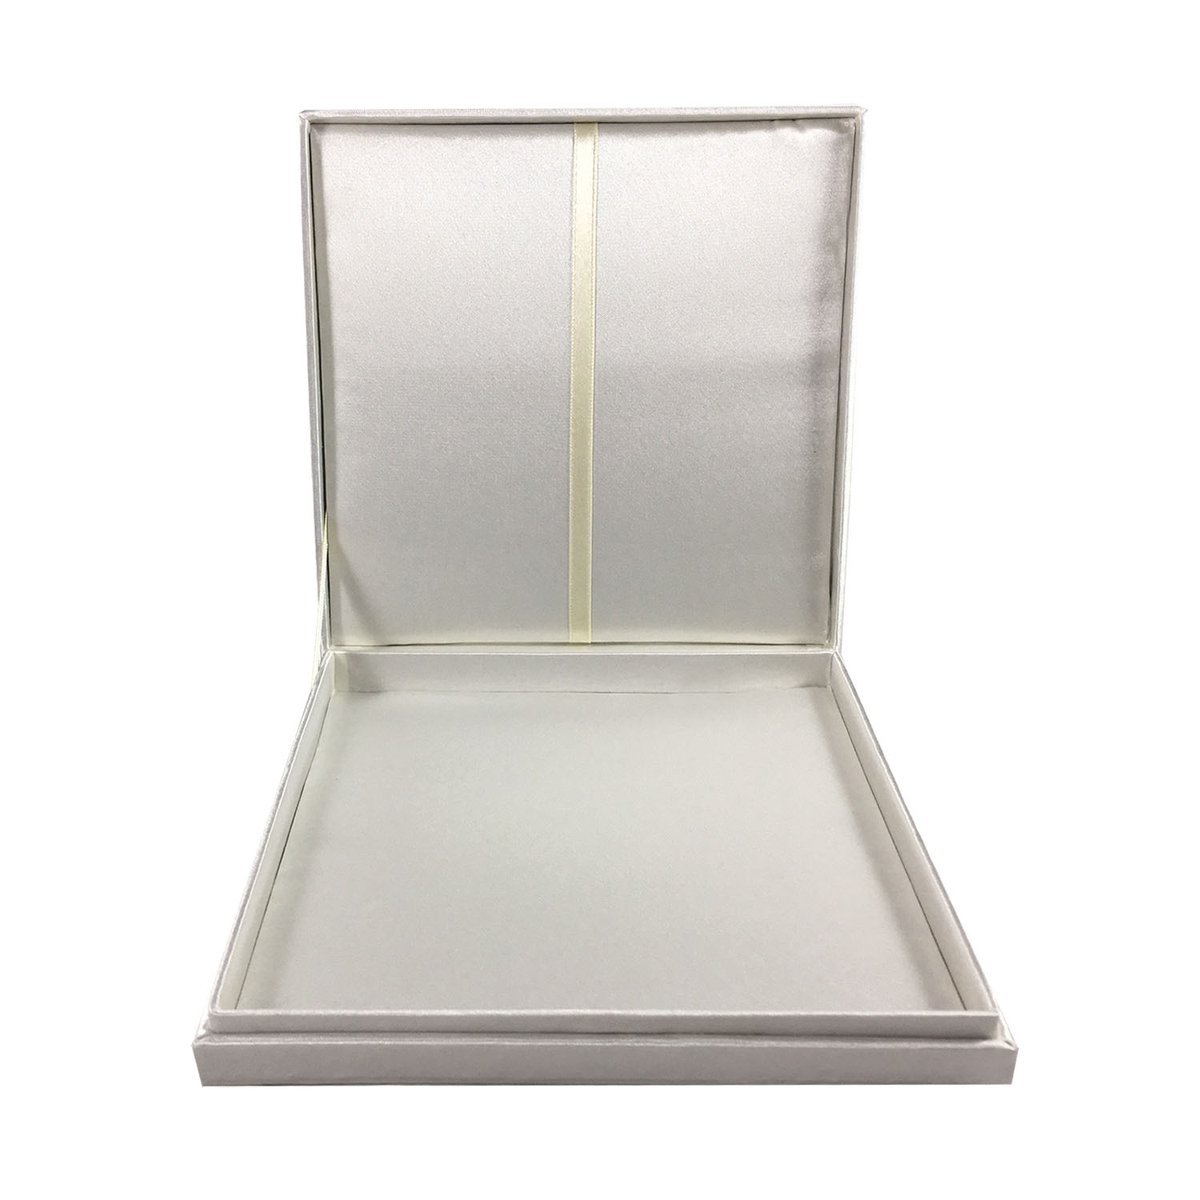 Our plain faux silk invitation boxes are available in over 50 colors and now on sale. get your special deal this week #luxury #wedding #weddingboxes #thaisilkbox #silkboxes #handmadeinvitations